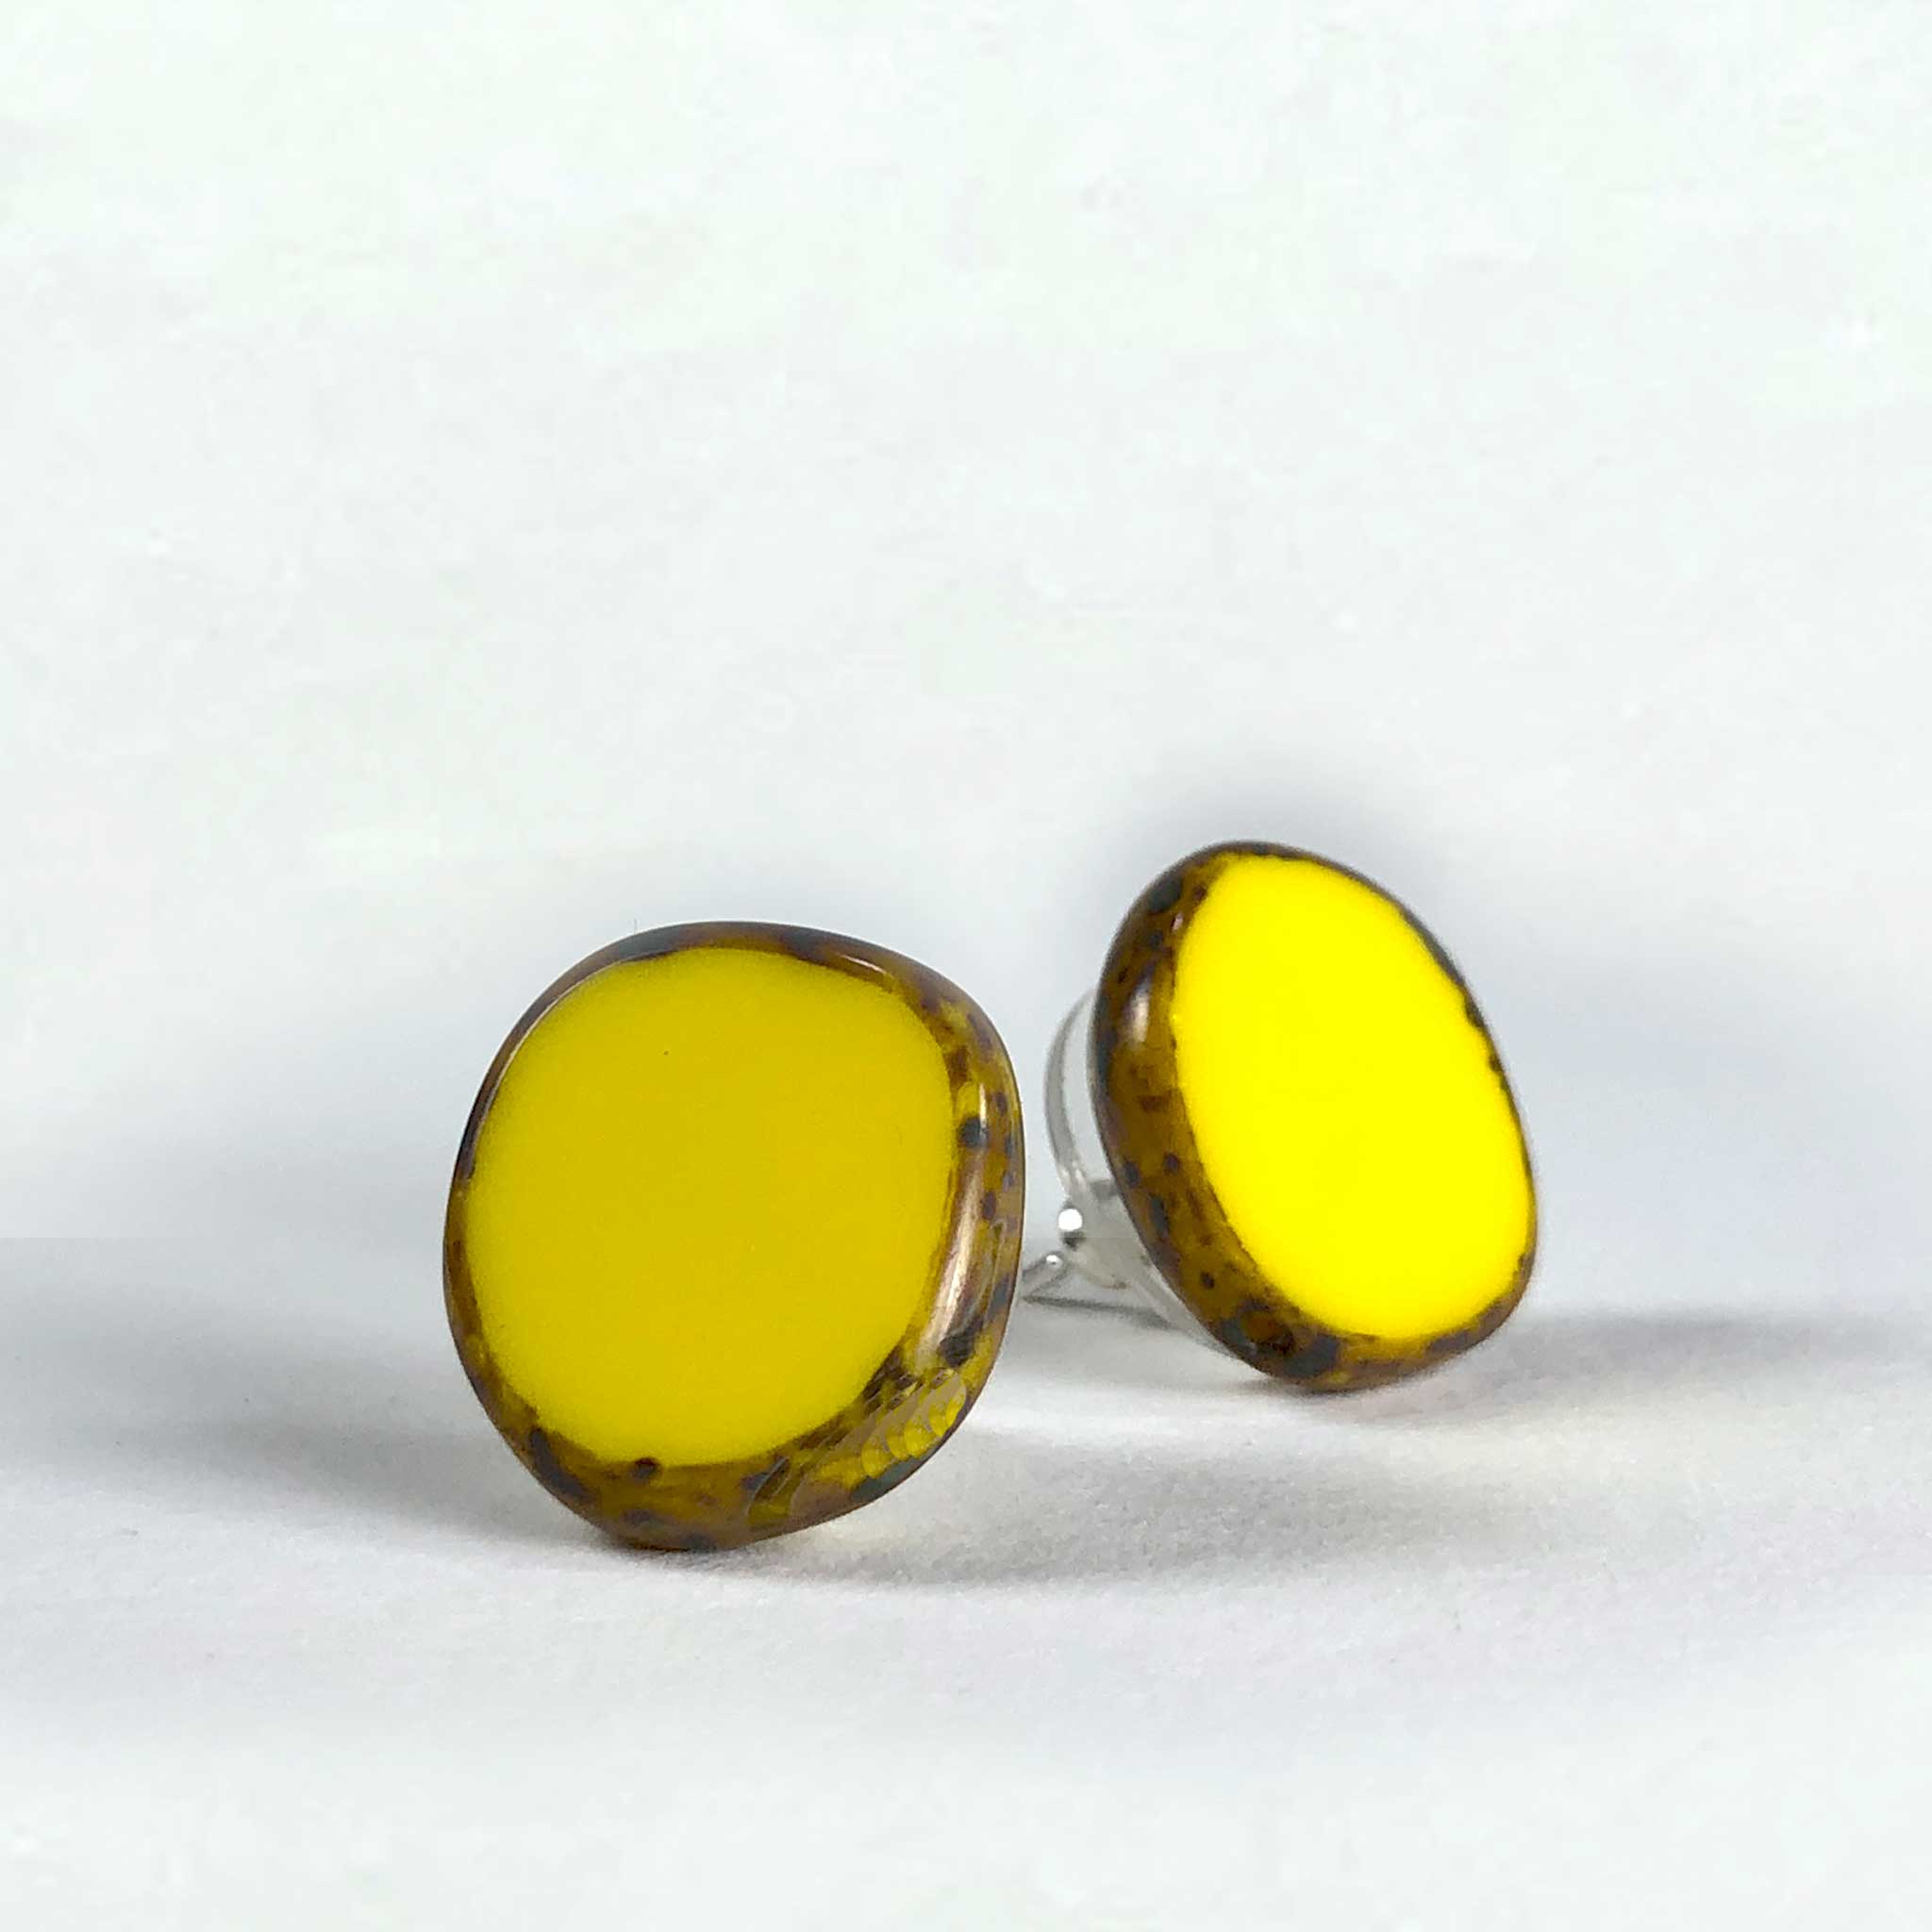 earring earrings glass round stud silver scma smith college musuem of art yellow